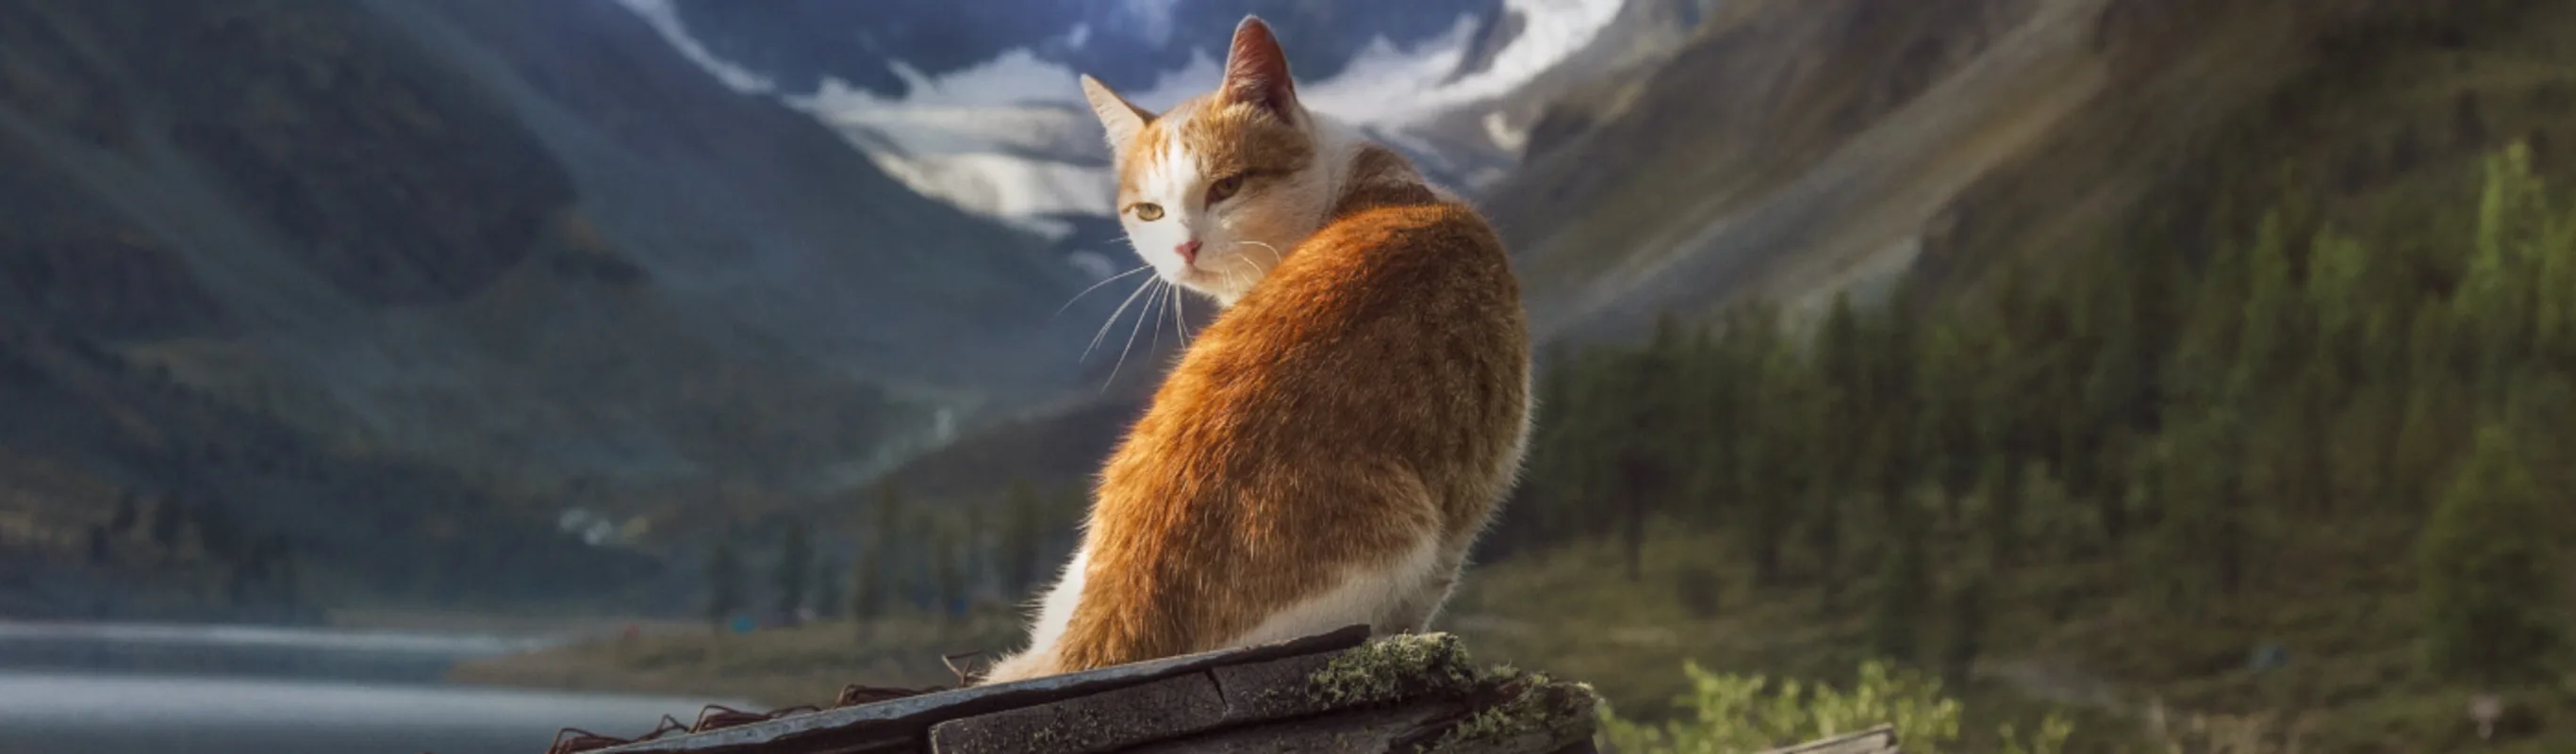 Orange cat in front of a background of trees and mountains